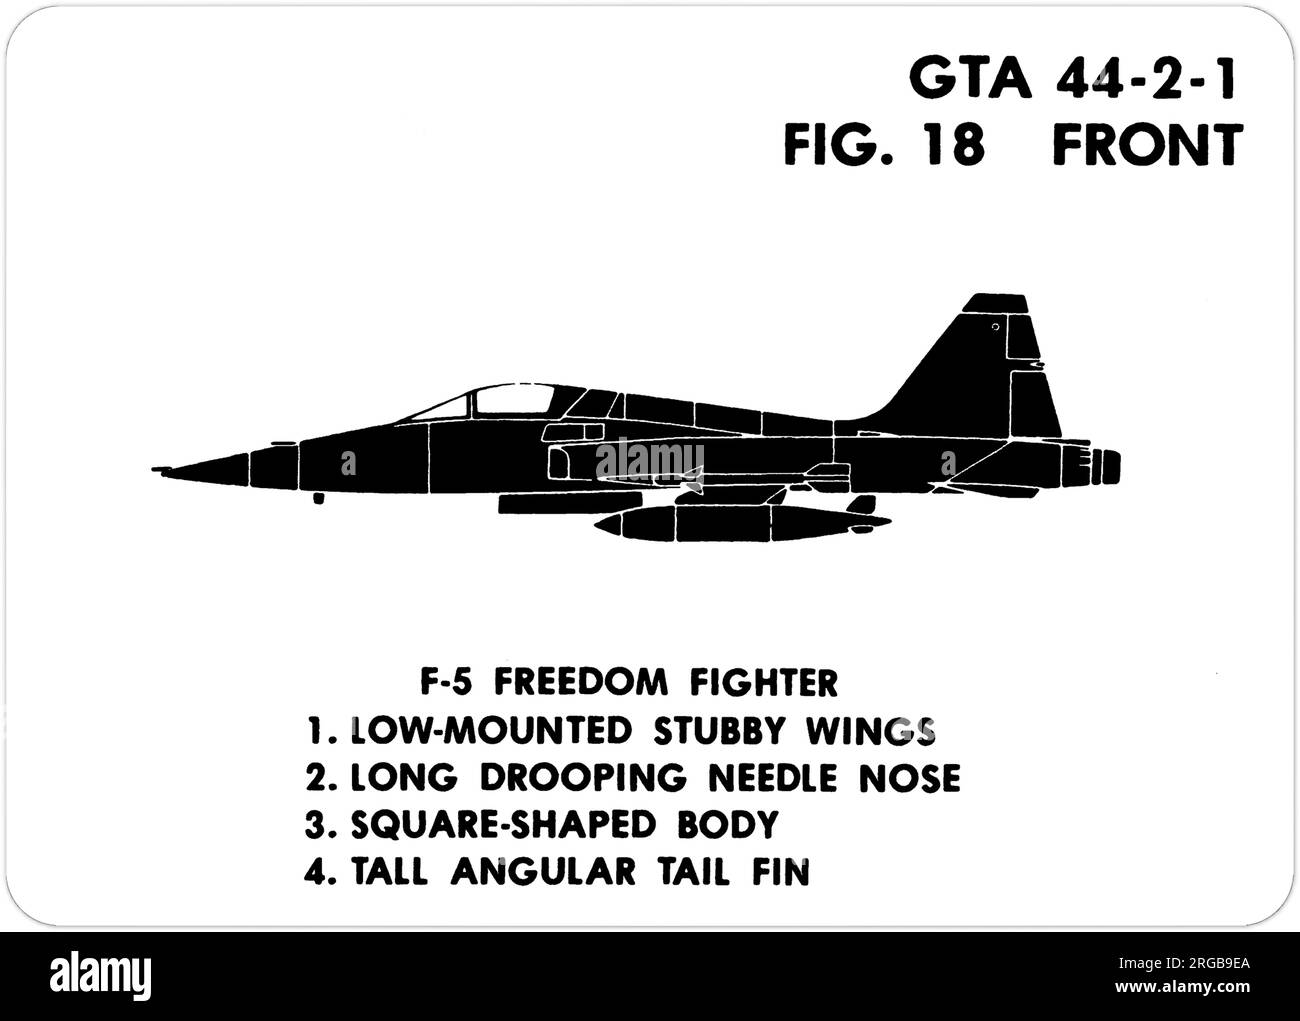 Northrop F-5A. This is one of the series of Graphics Training Aids (GTA) used by the United States Army to train their personnel to recognize friendly and hostile aircraft. This particular set, GTA 44-2-1, was issued in July1977. The set features aircraft from: Canada, Italy, United Kingdom, United States, and the USSR. Stock Photo